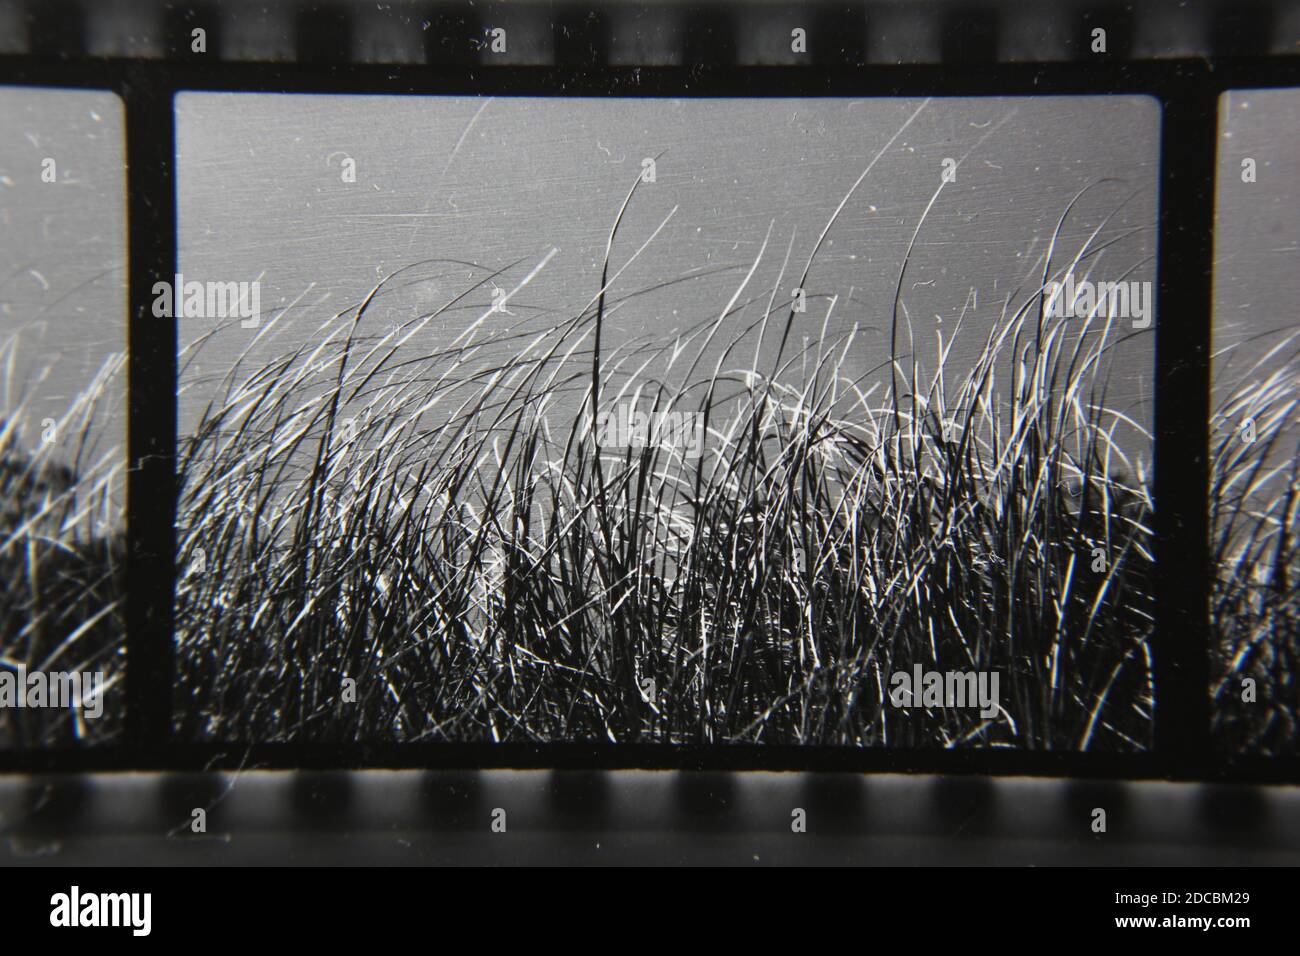 Fine 1970s vintage black and white photography of beach grass in profile and silhouette. Stock Photo